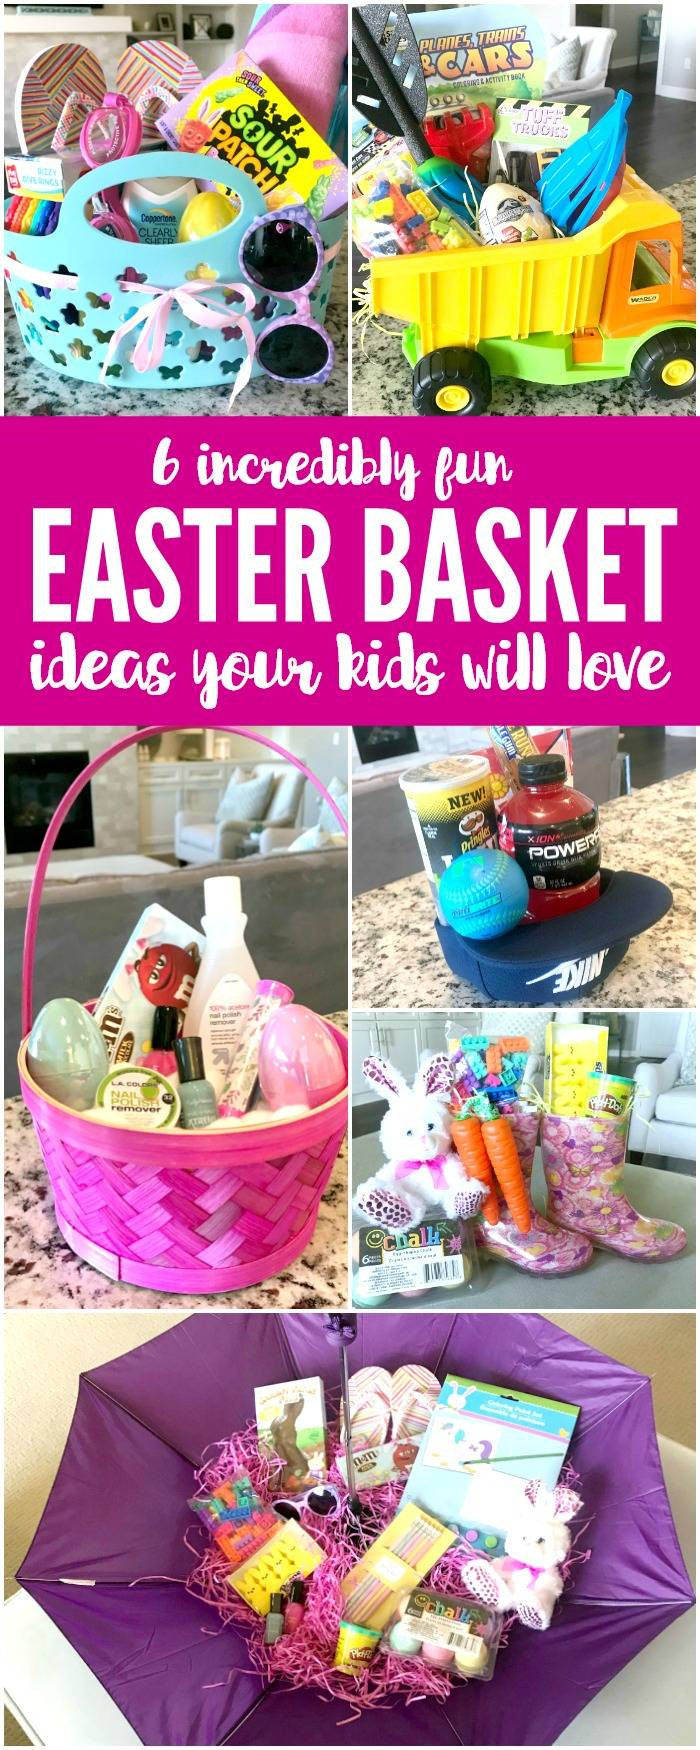 Easter Gift Ideas For Teenagers
 6 Amazing Easter Basket Ideas to Try This Year Passion